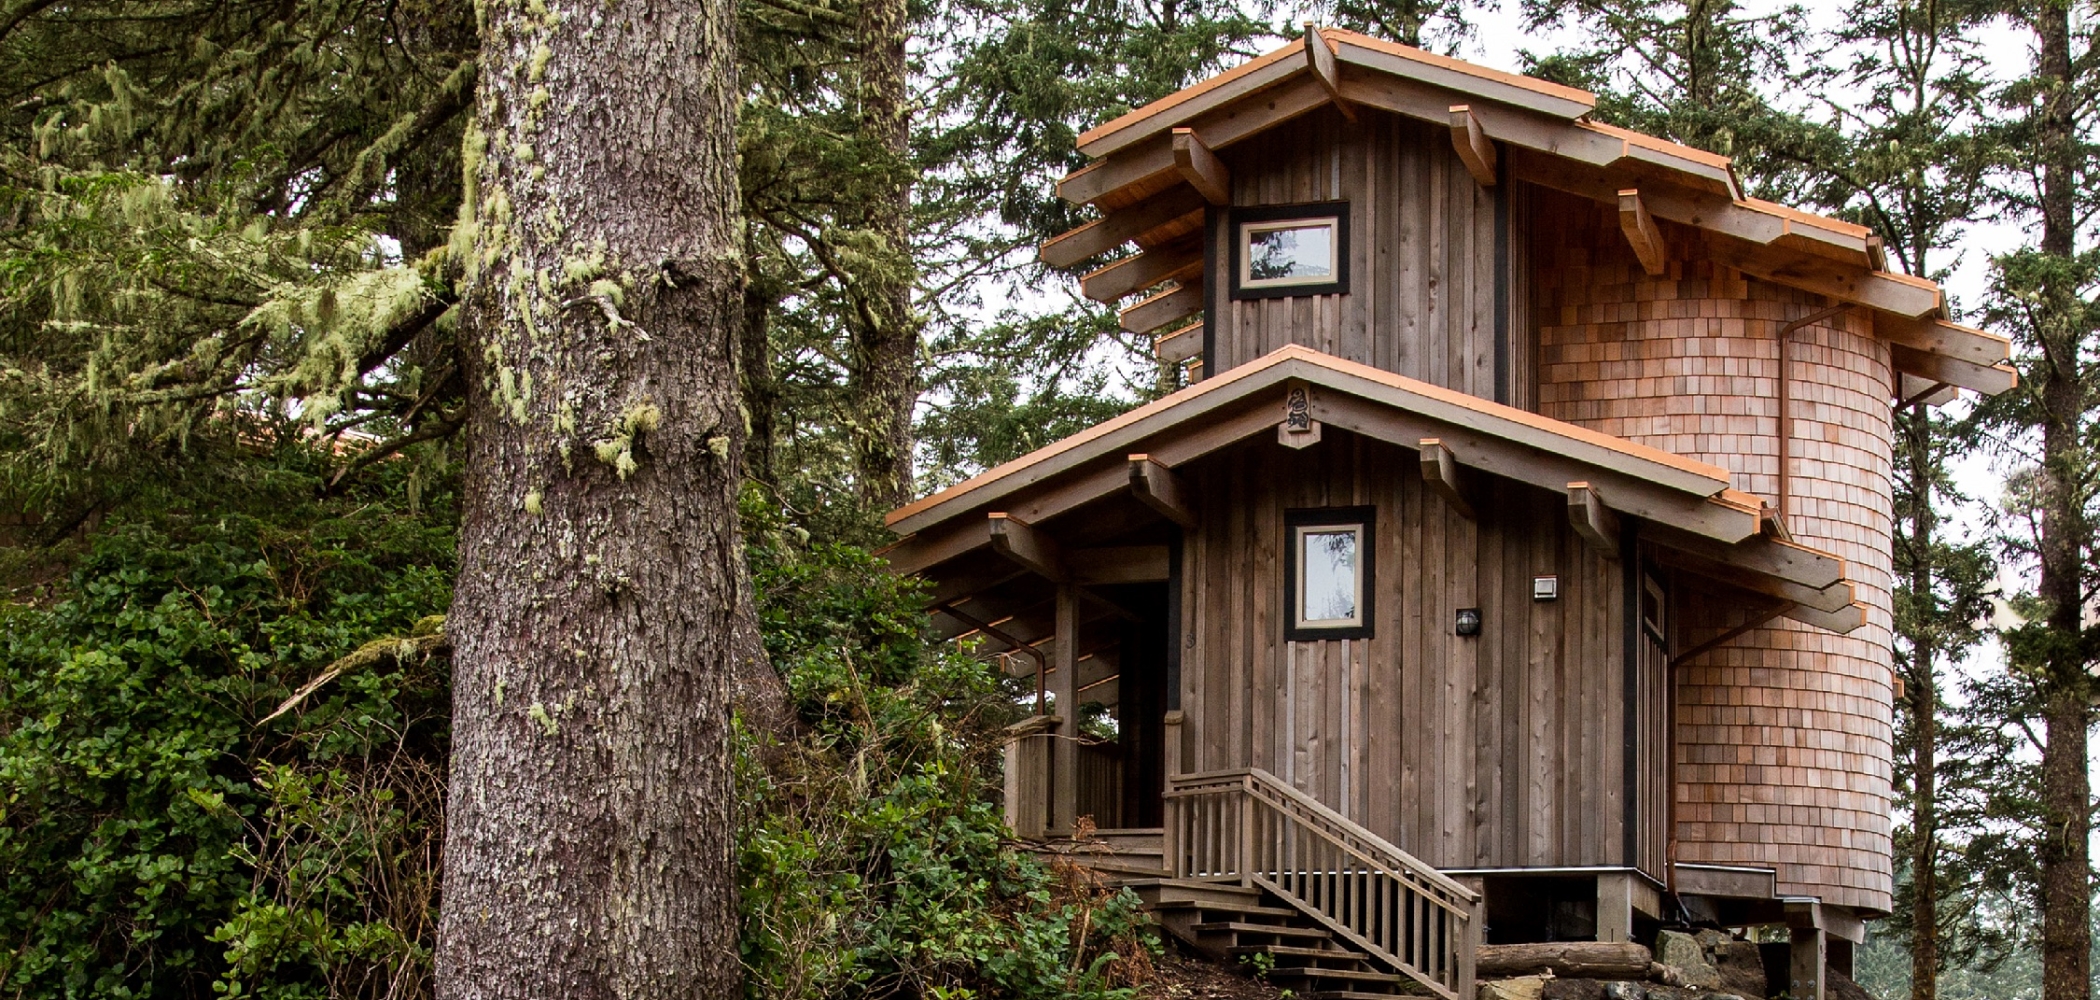 Where to stay in BC Canada